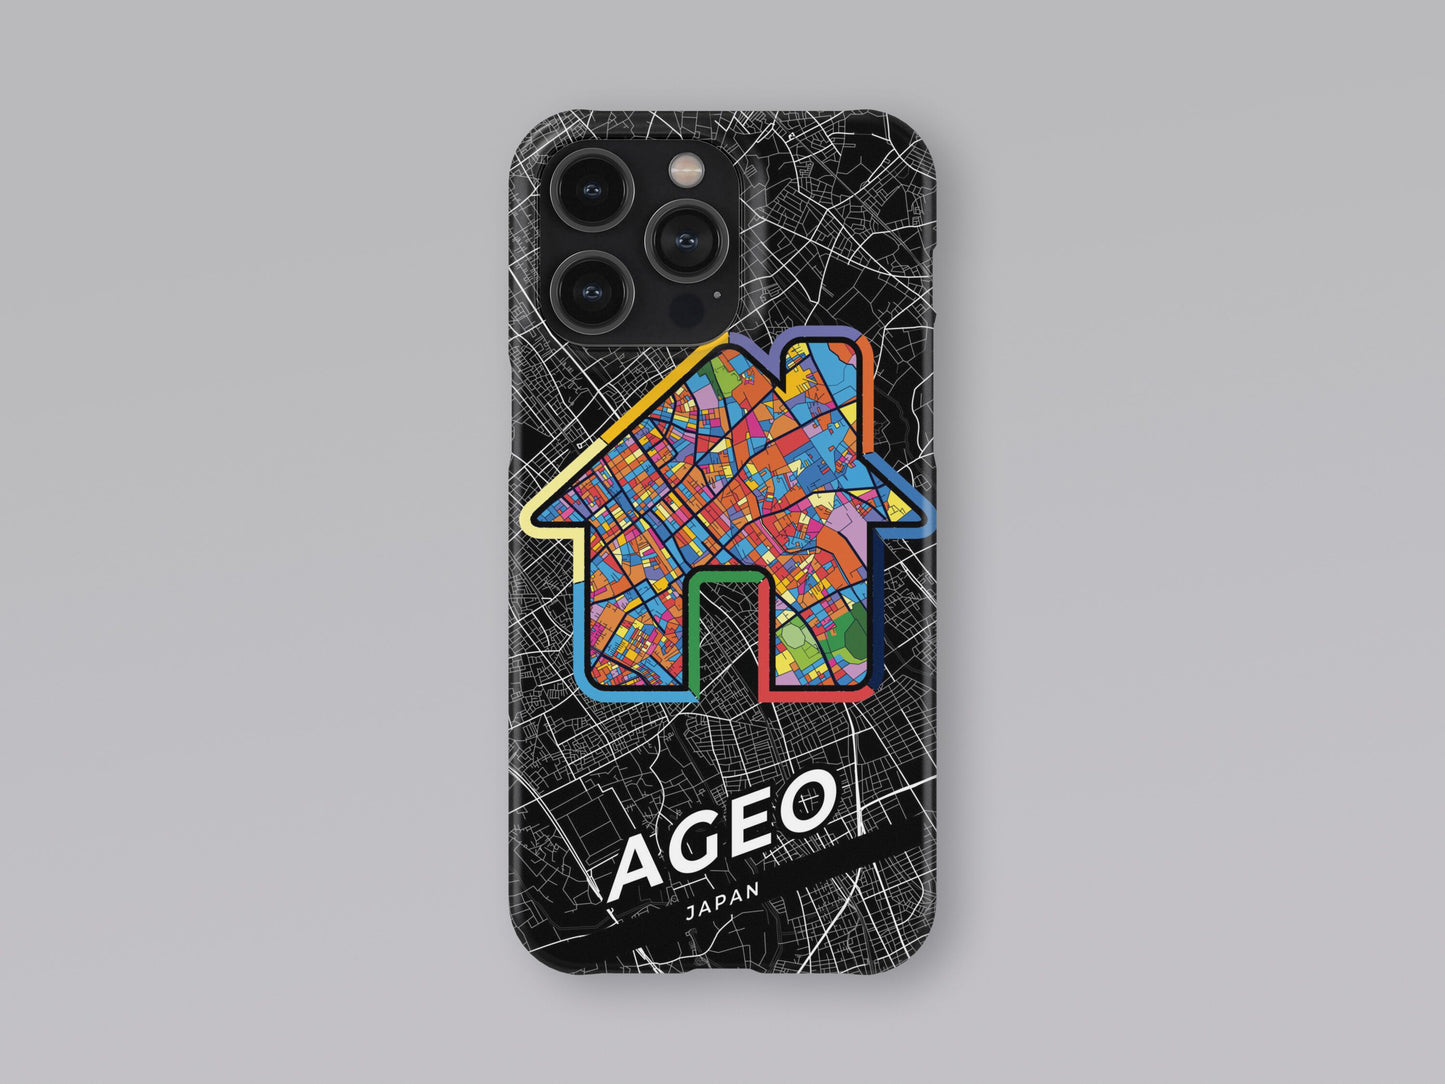 Ageo Japan slim phone case with colorful icon. Birthday, wedding or housewarming gift. Couple match cases. 3